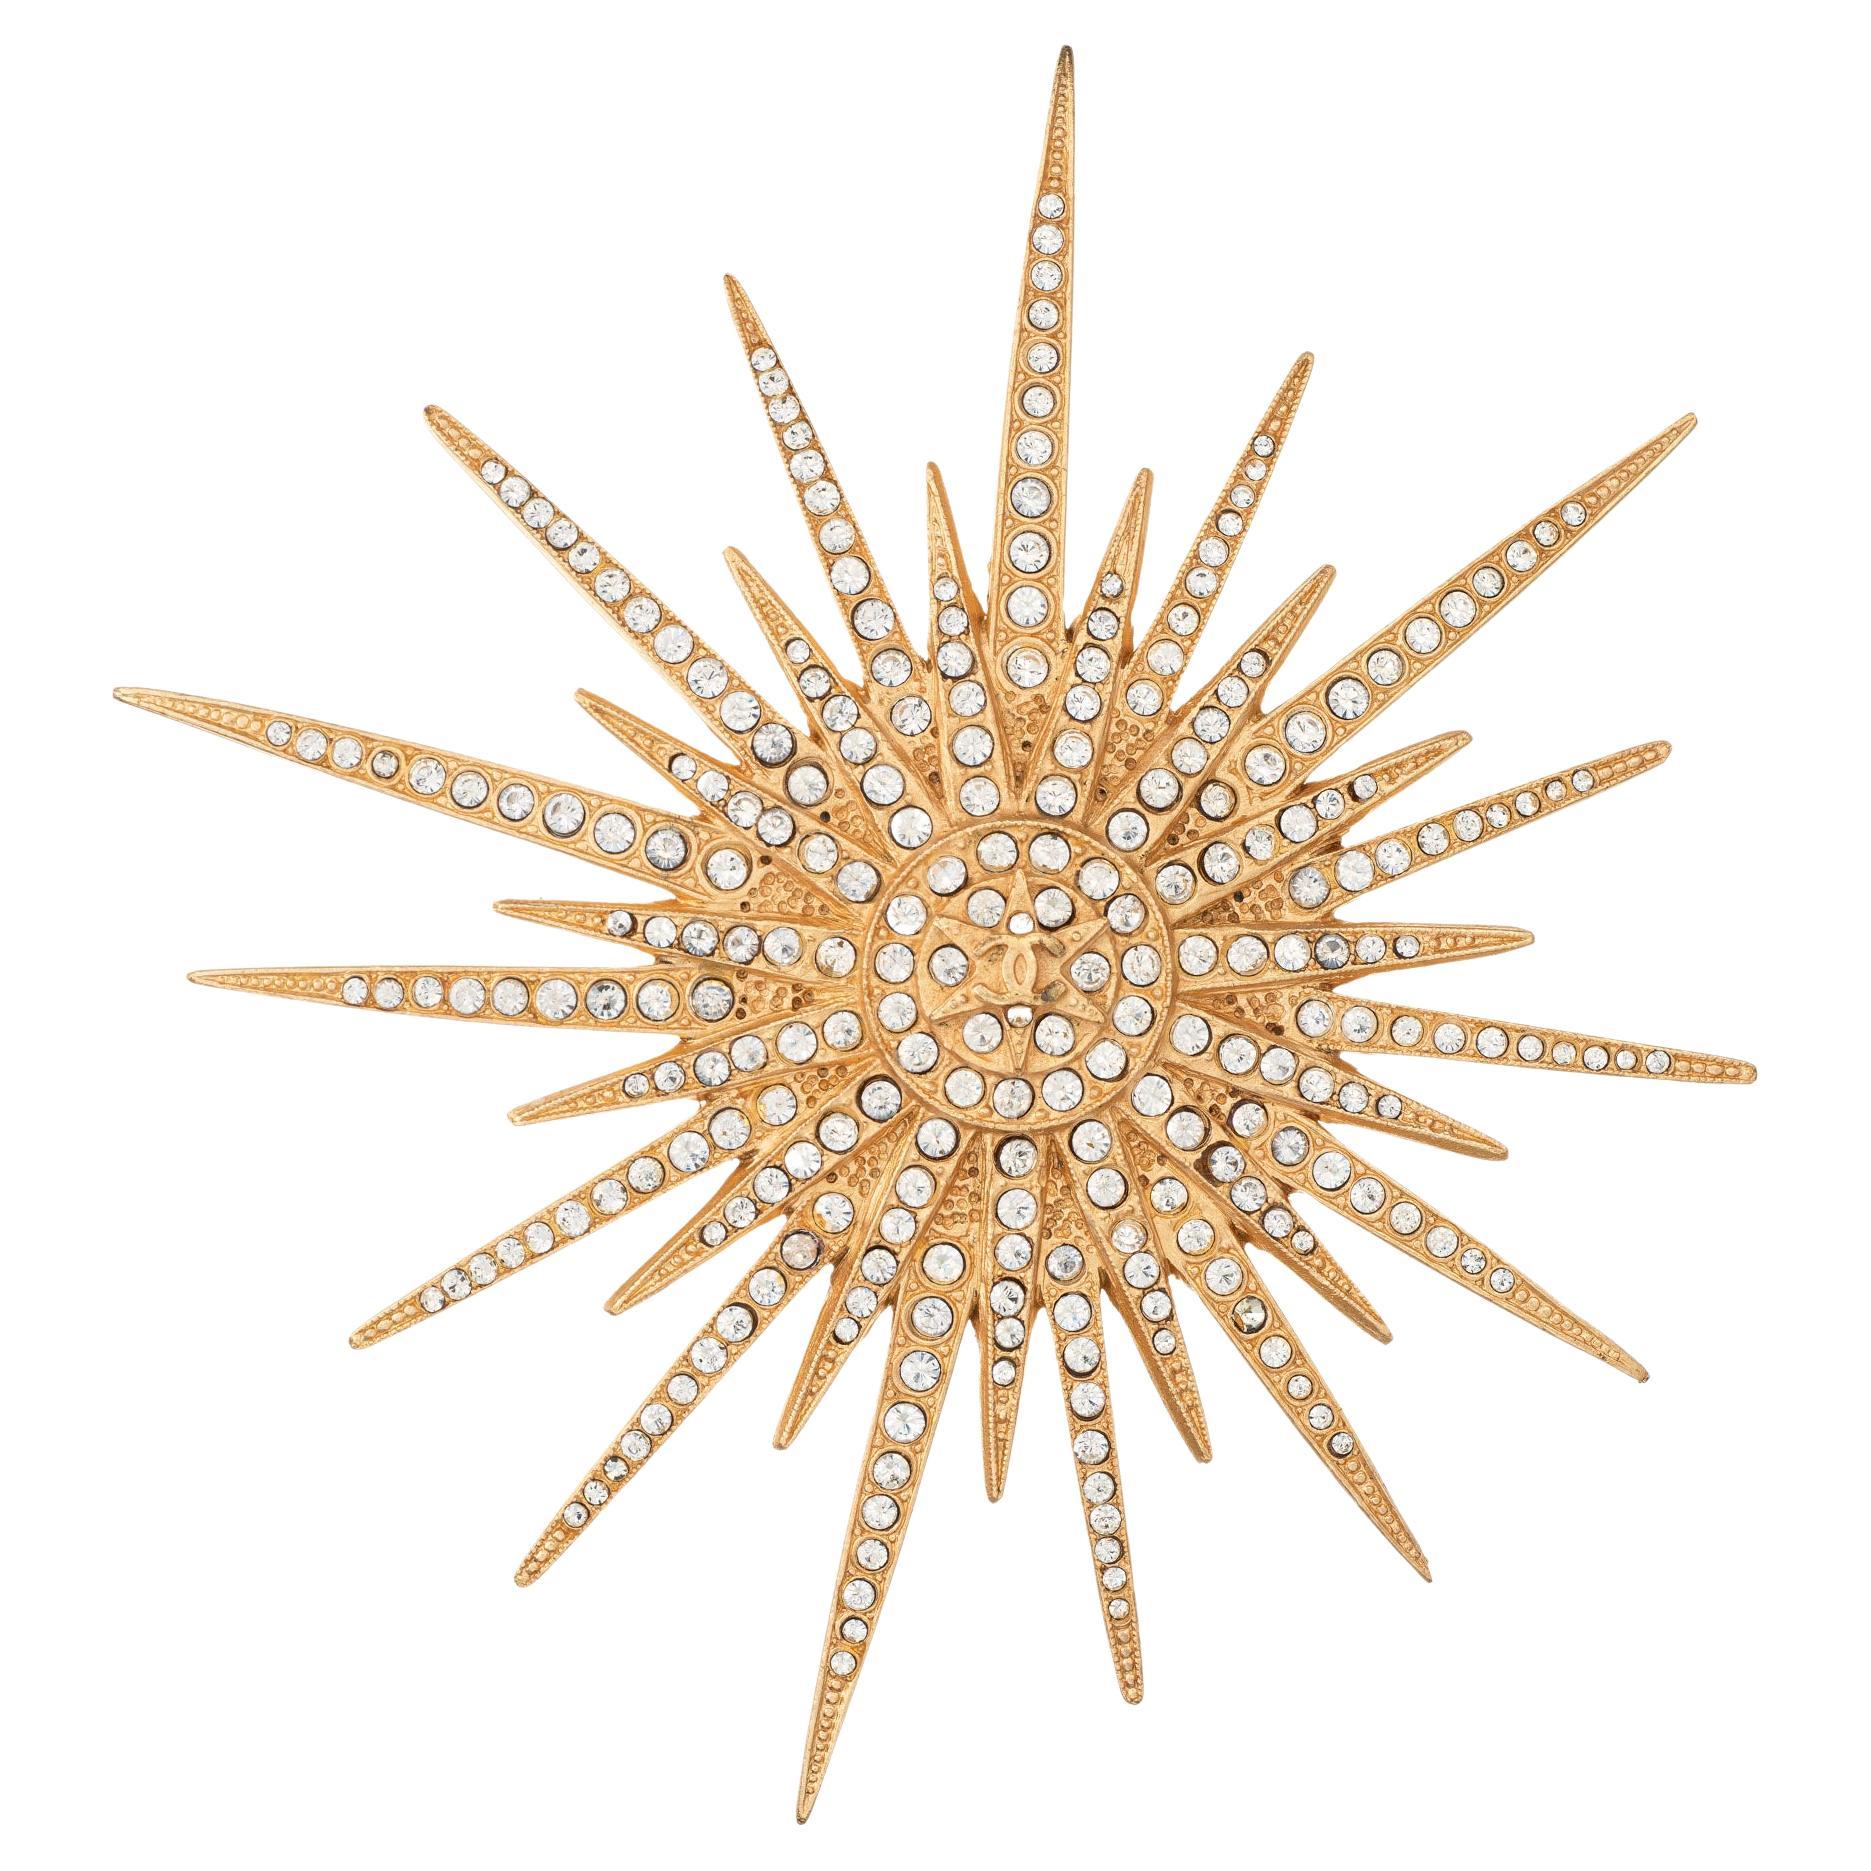 Chanel - Vintage Starburst Brooch Pin C2001 Tone French Modern Crystal Yellow Gold